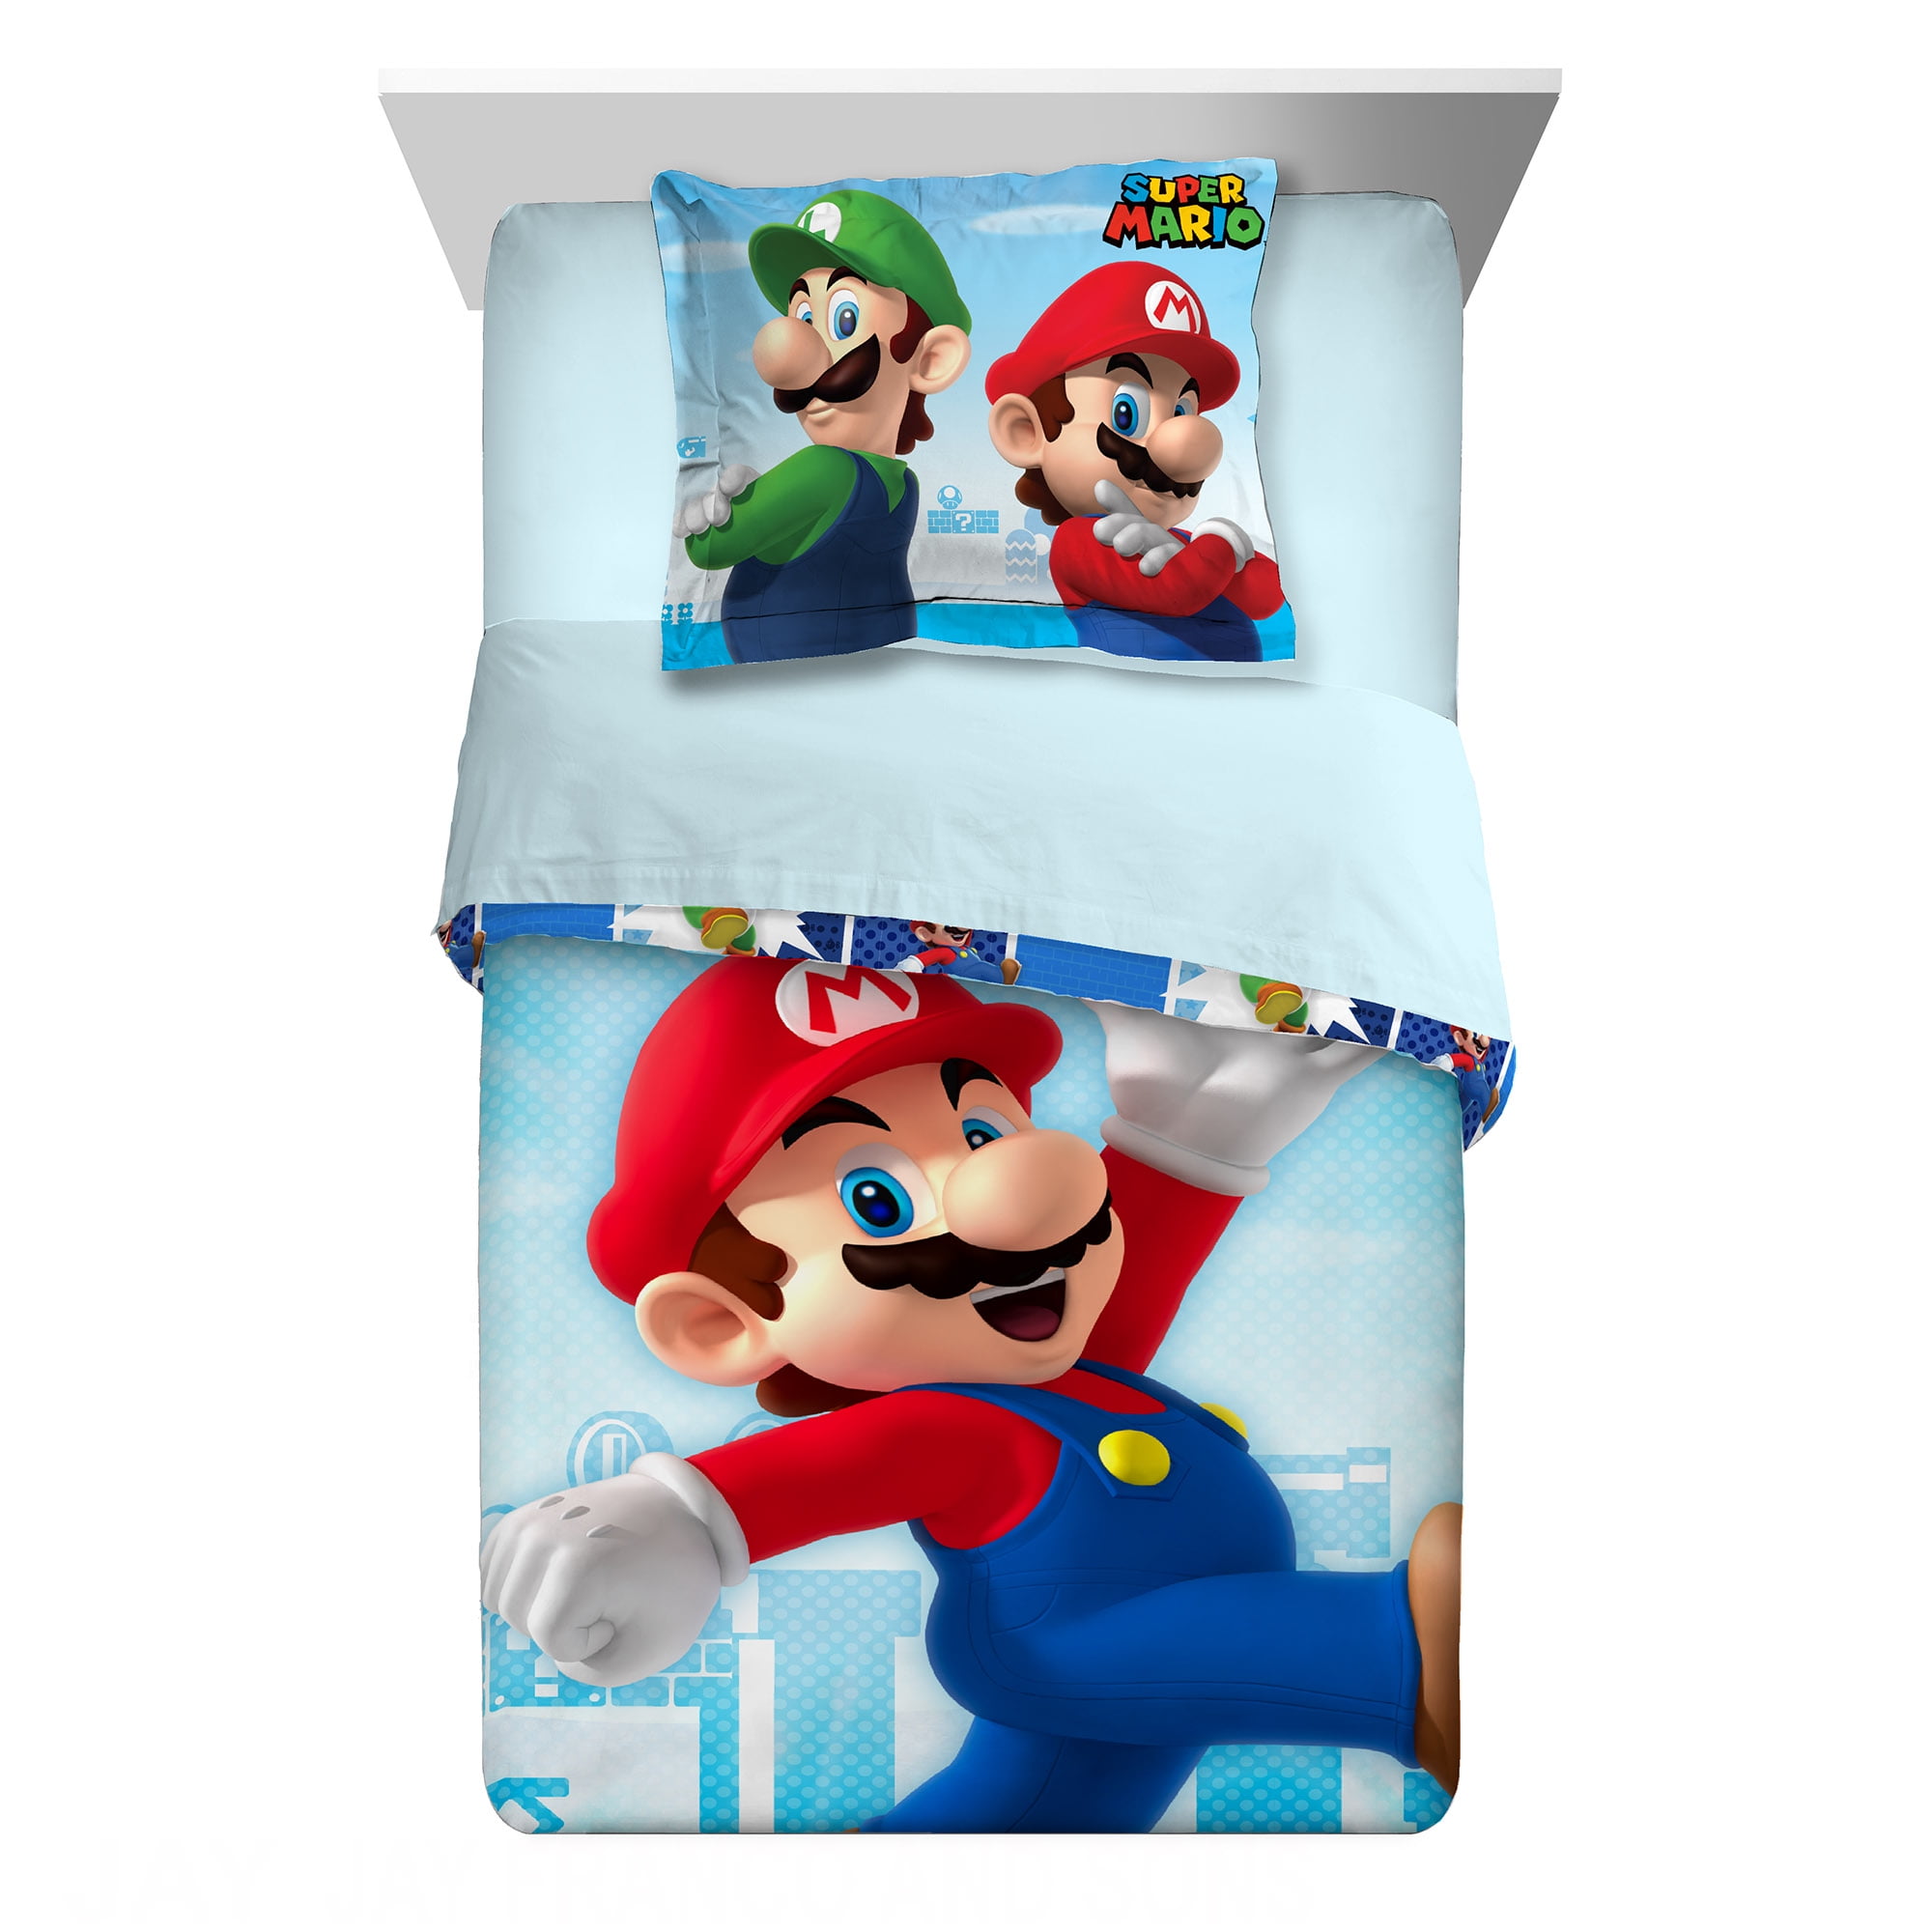 nEw VIDEO GAMES BED SHEETS SET Mario Sonic Angry Birds Sheets Pillowcase 